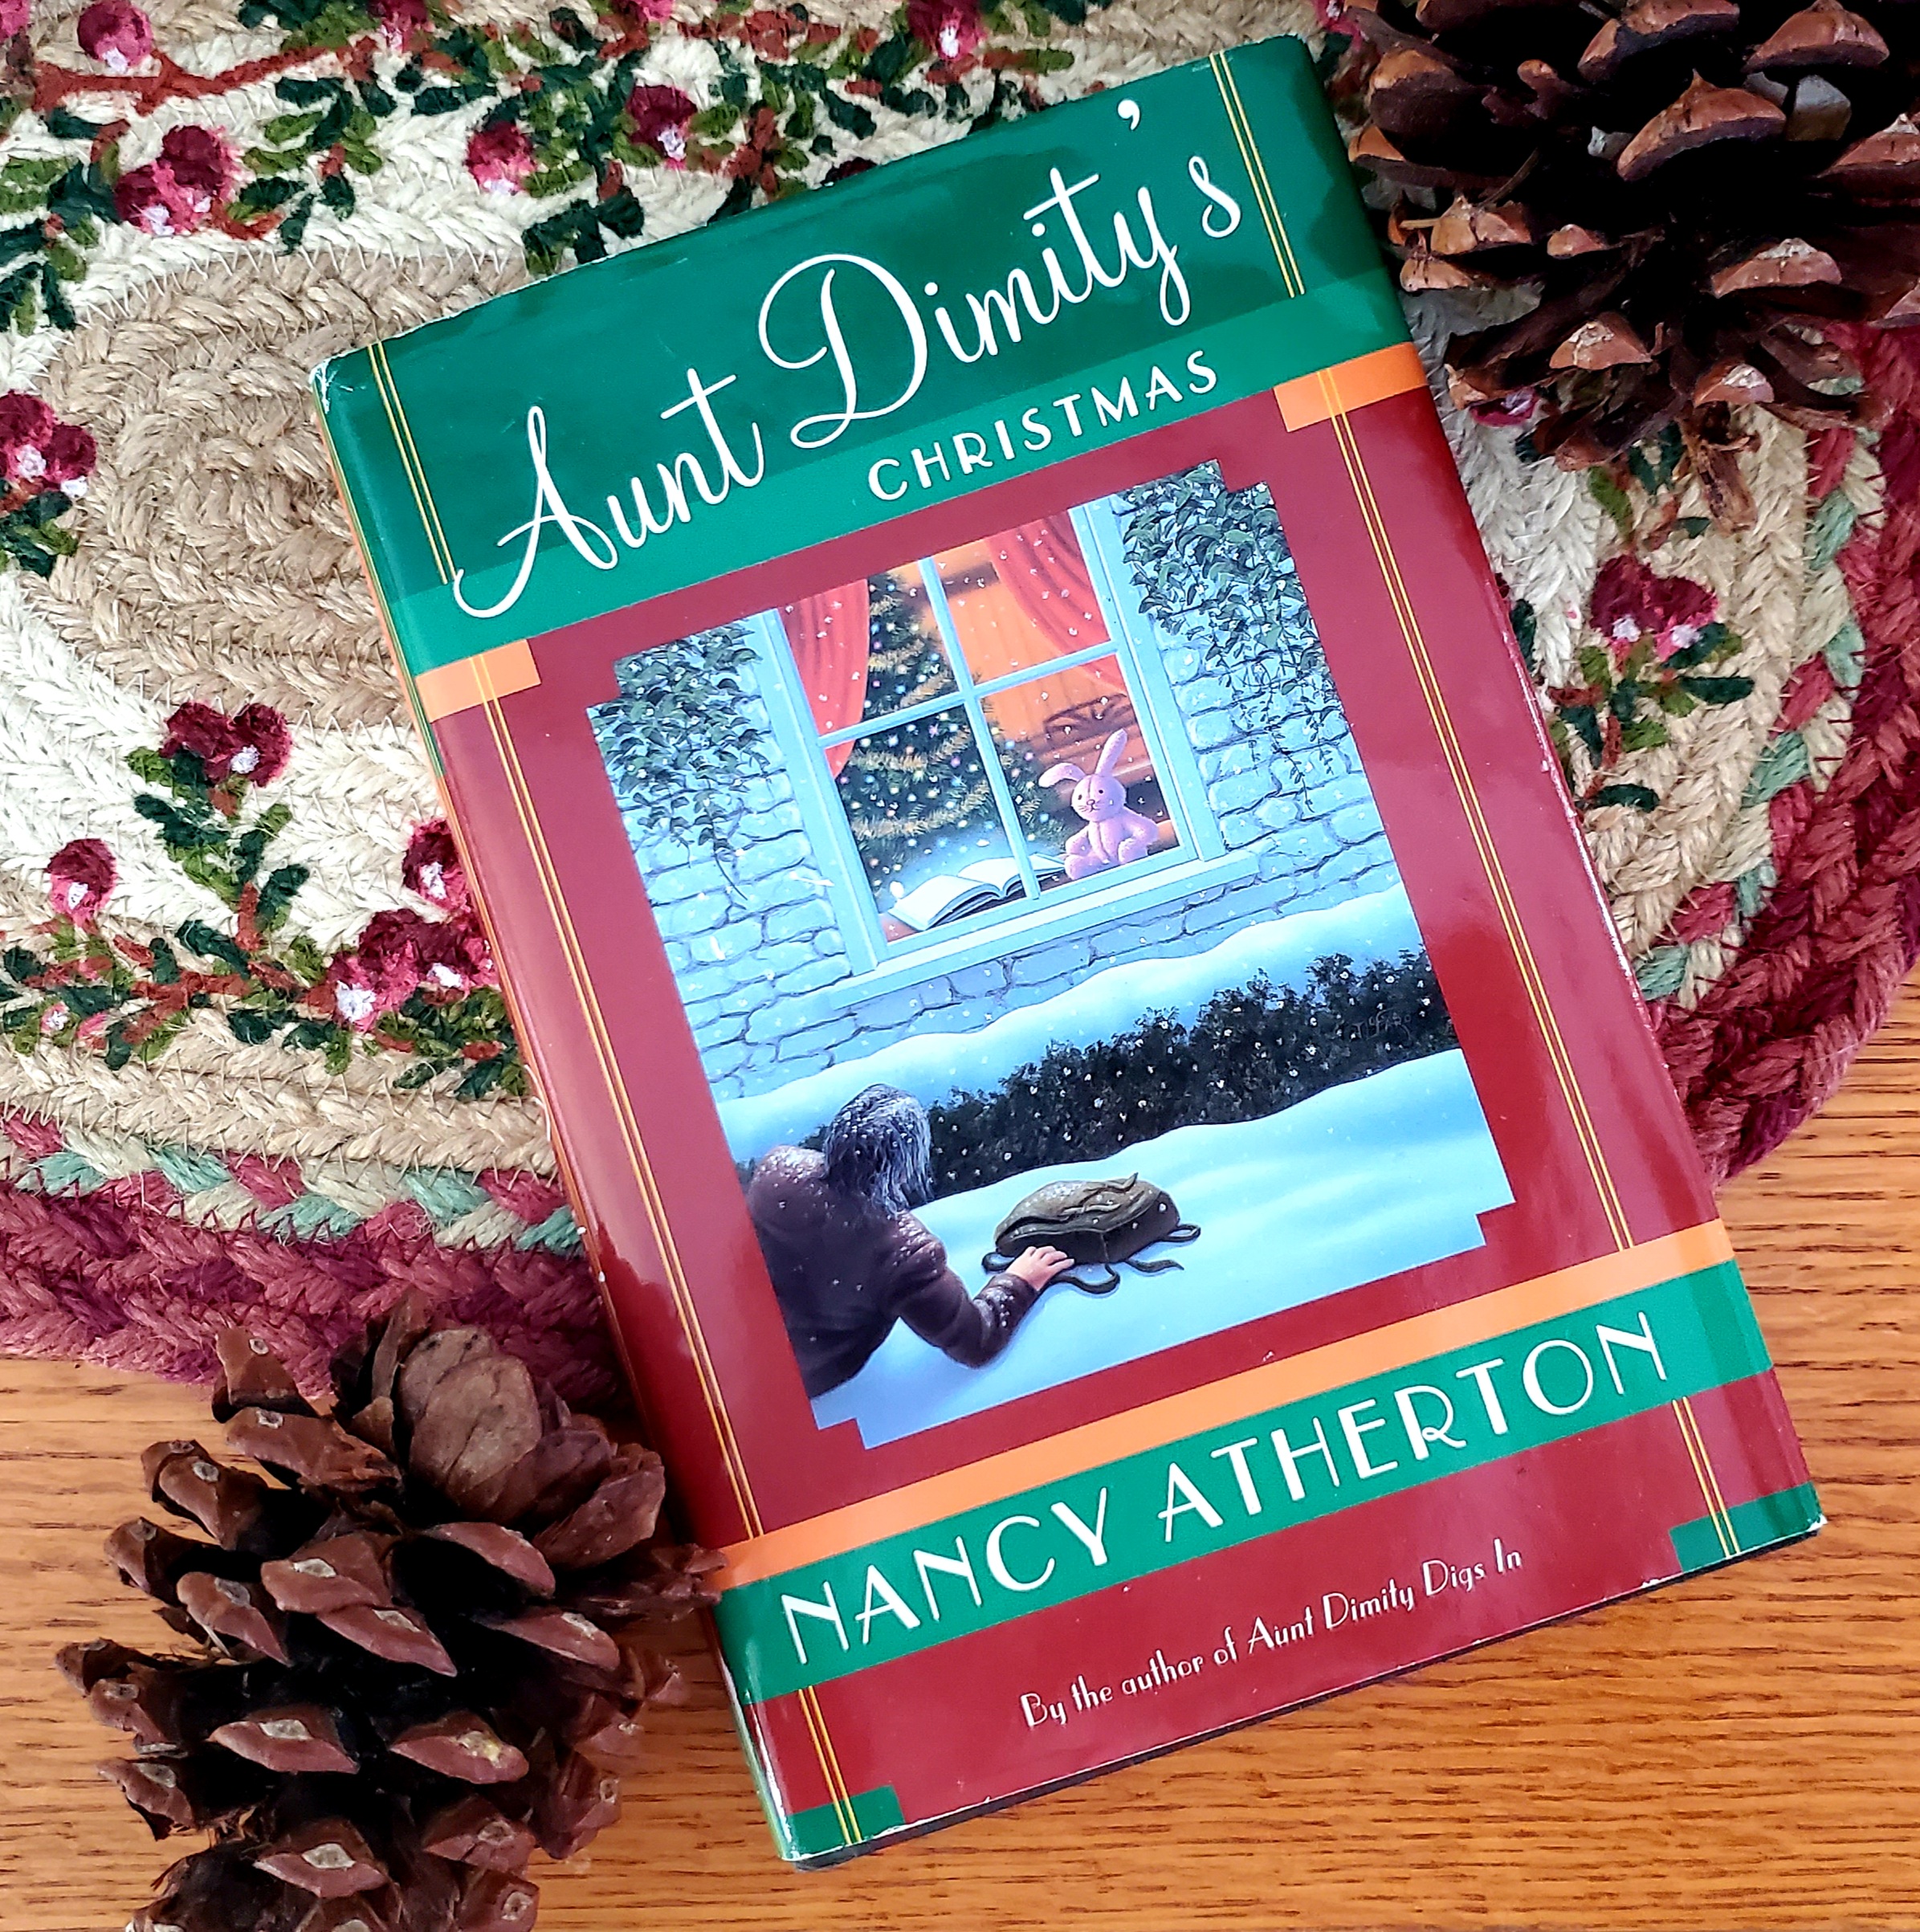 Aunt Dimity's Christmas book under the Christmas tree